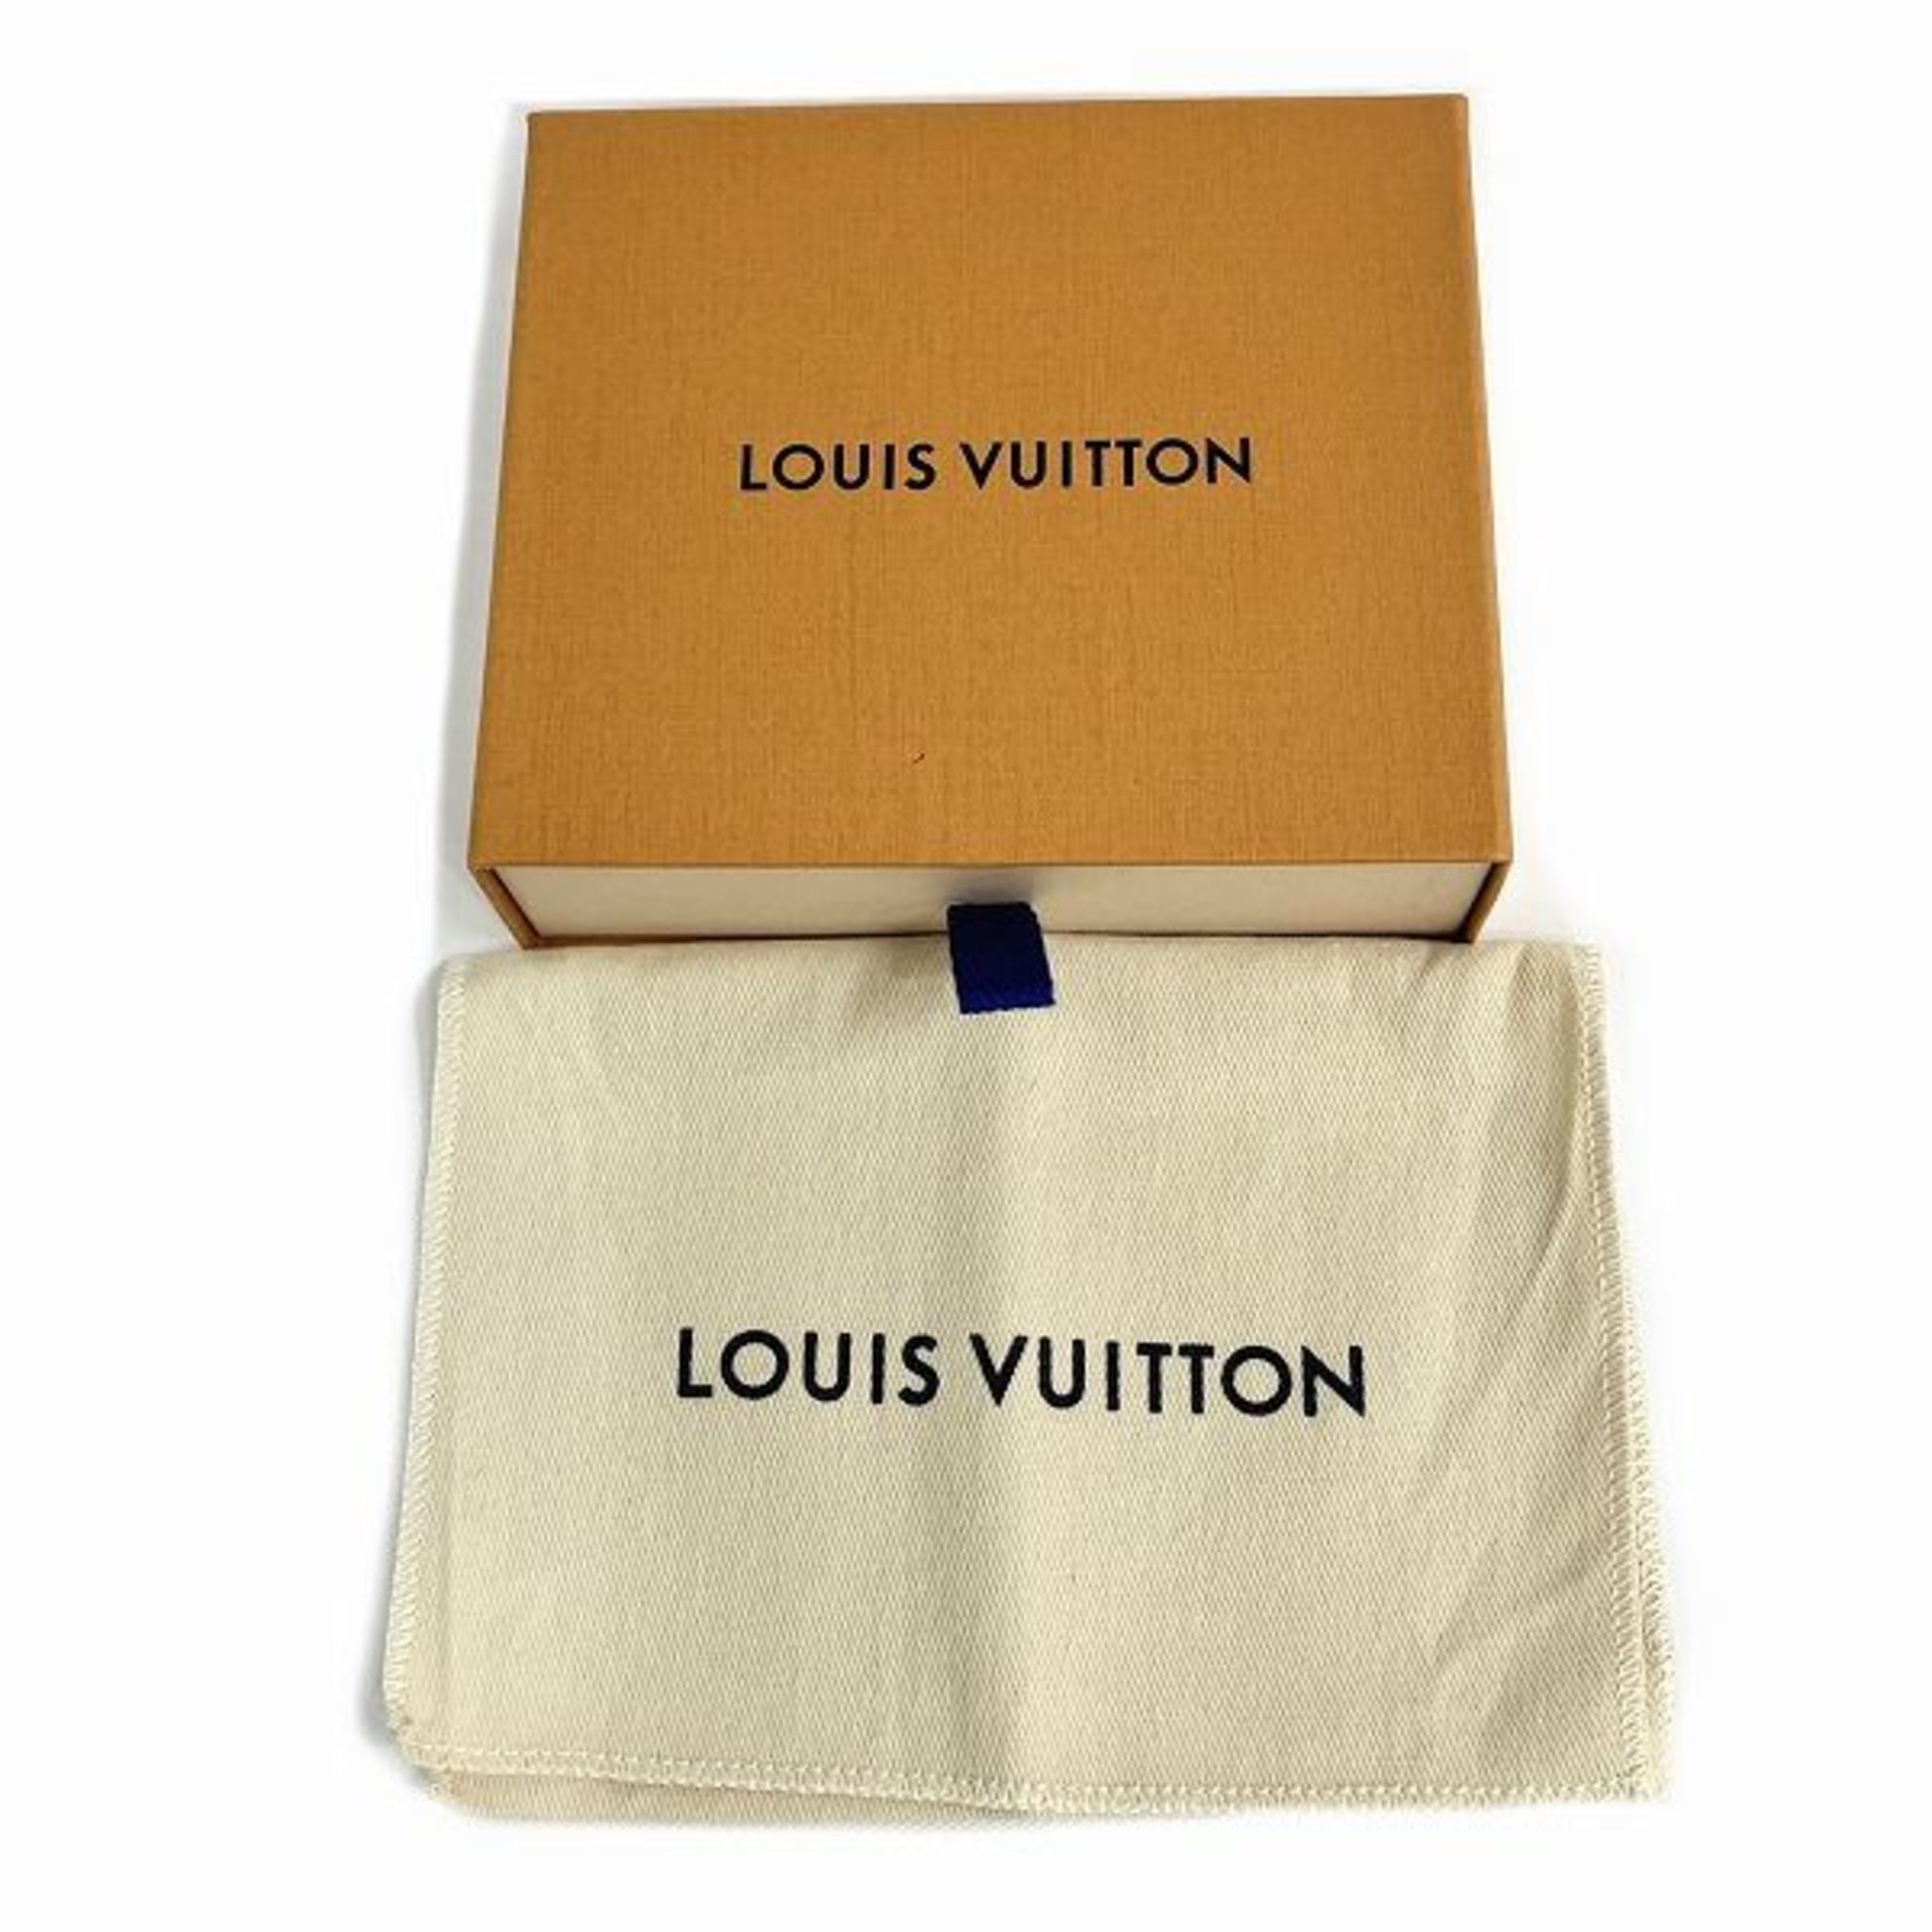 Louis Vuitton Vernis M90203 Zippy Coin Purse Wallets and coin cases Women's wallets